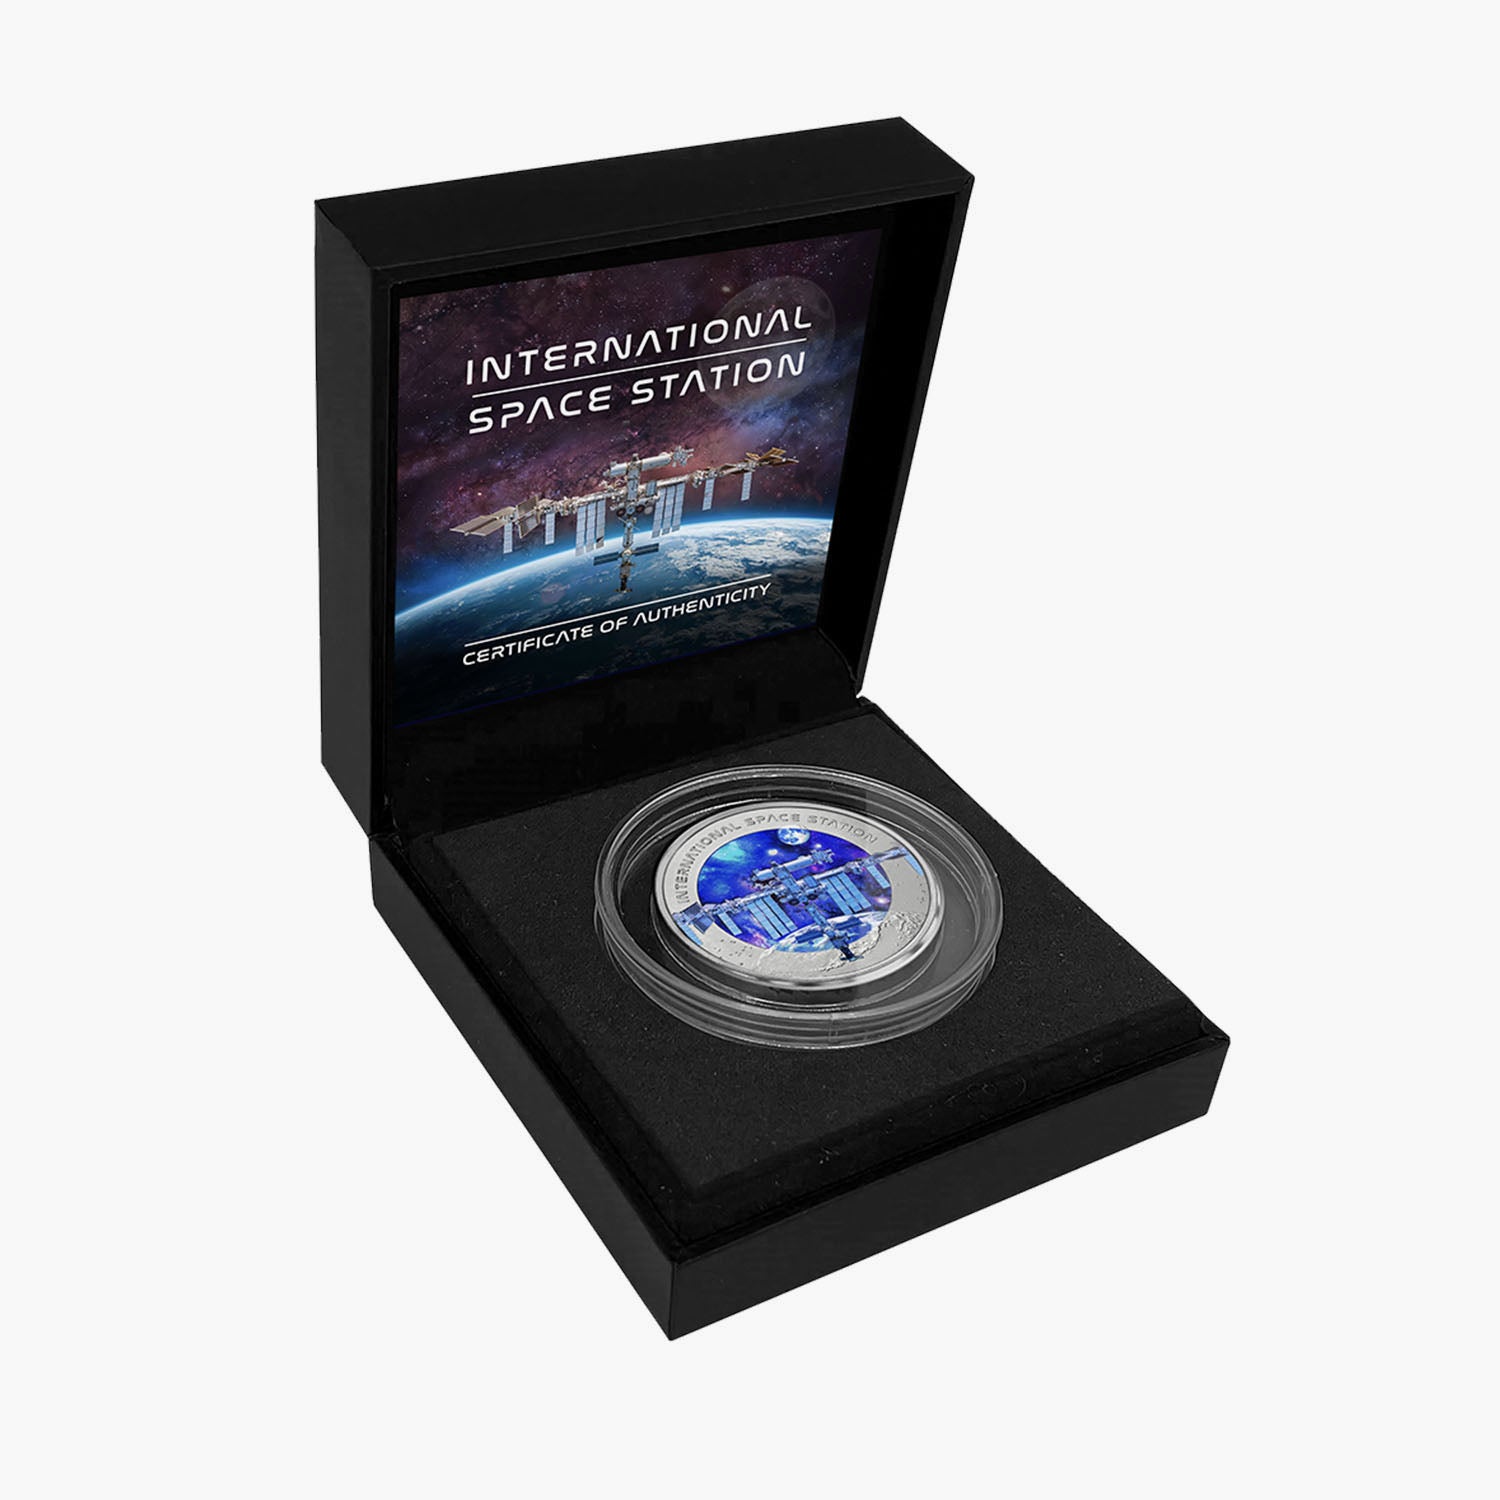 25 Years of the ISS 2023 Solid Titanium Coin